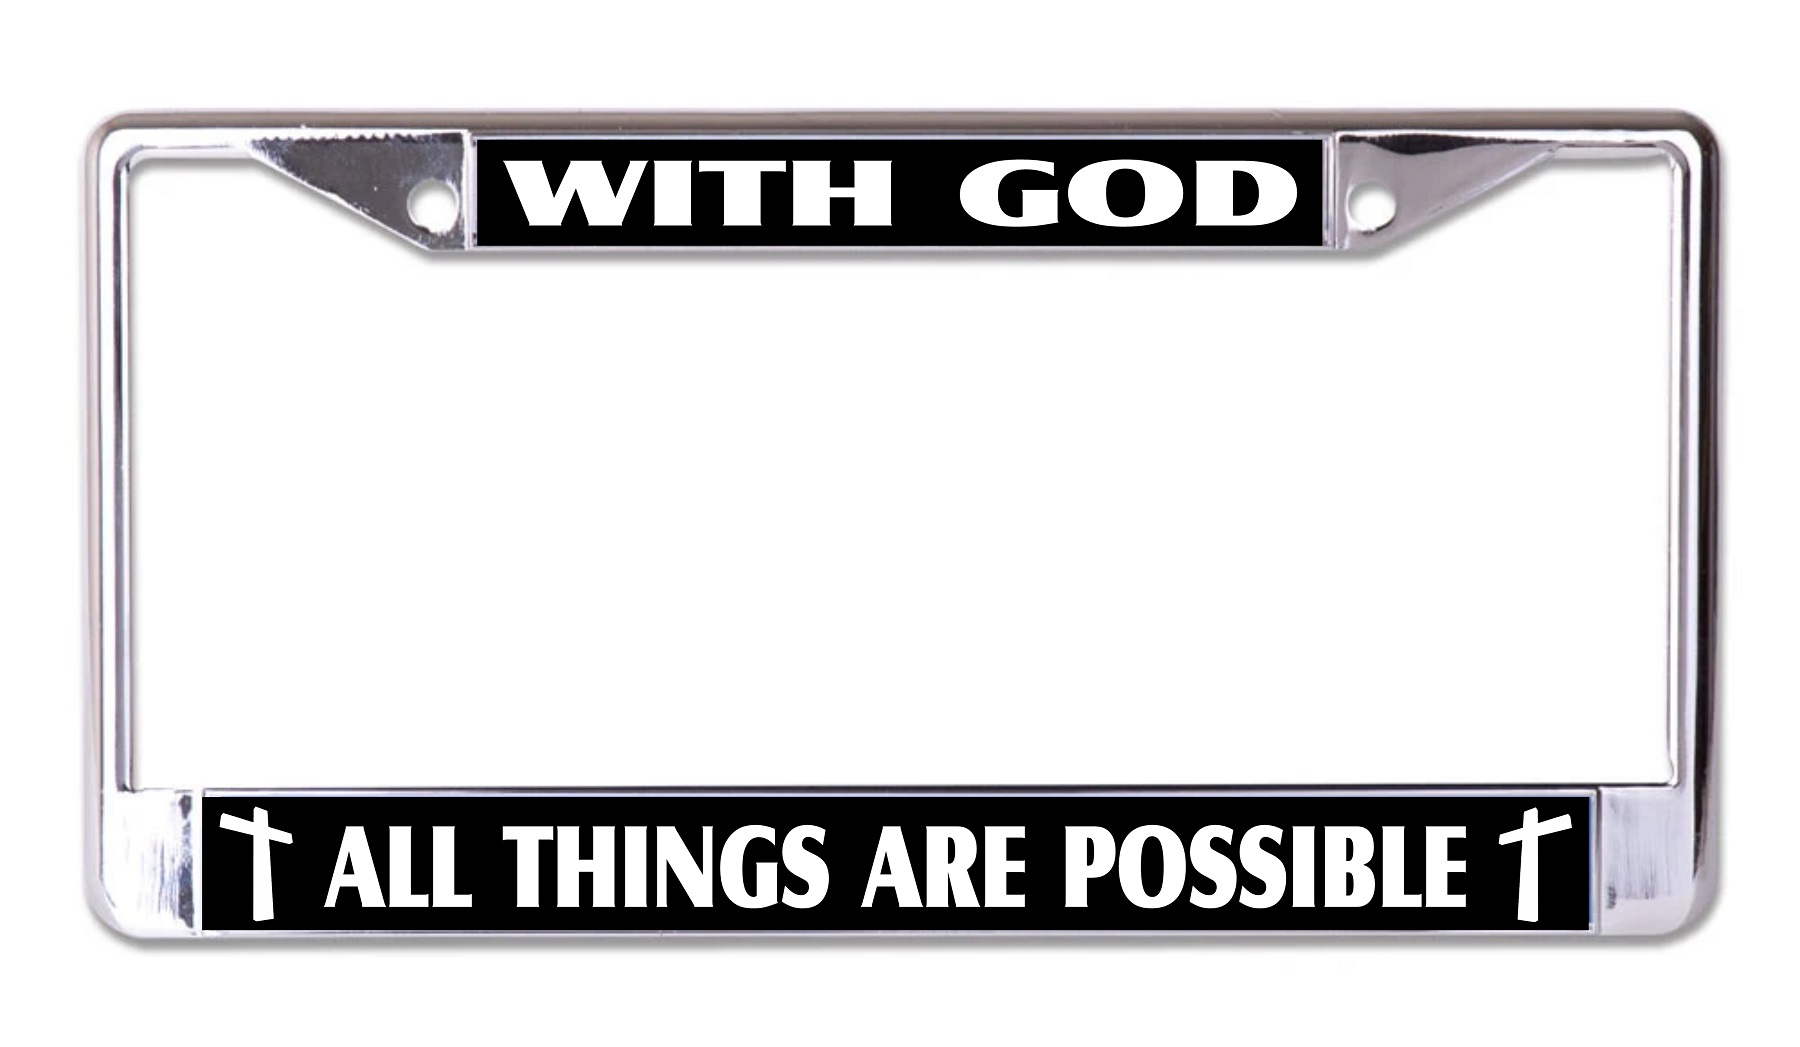 With God All Things Are Possible on Black Chrome License Plate FRAME